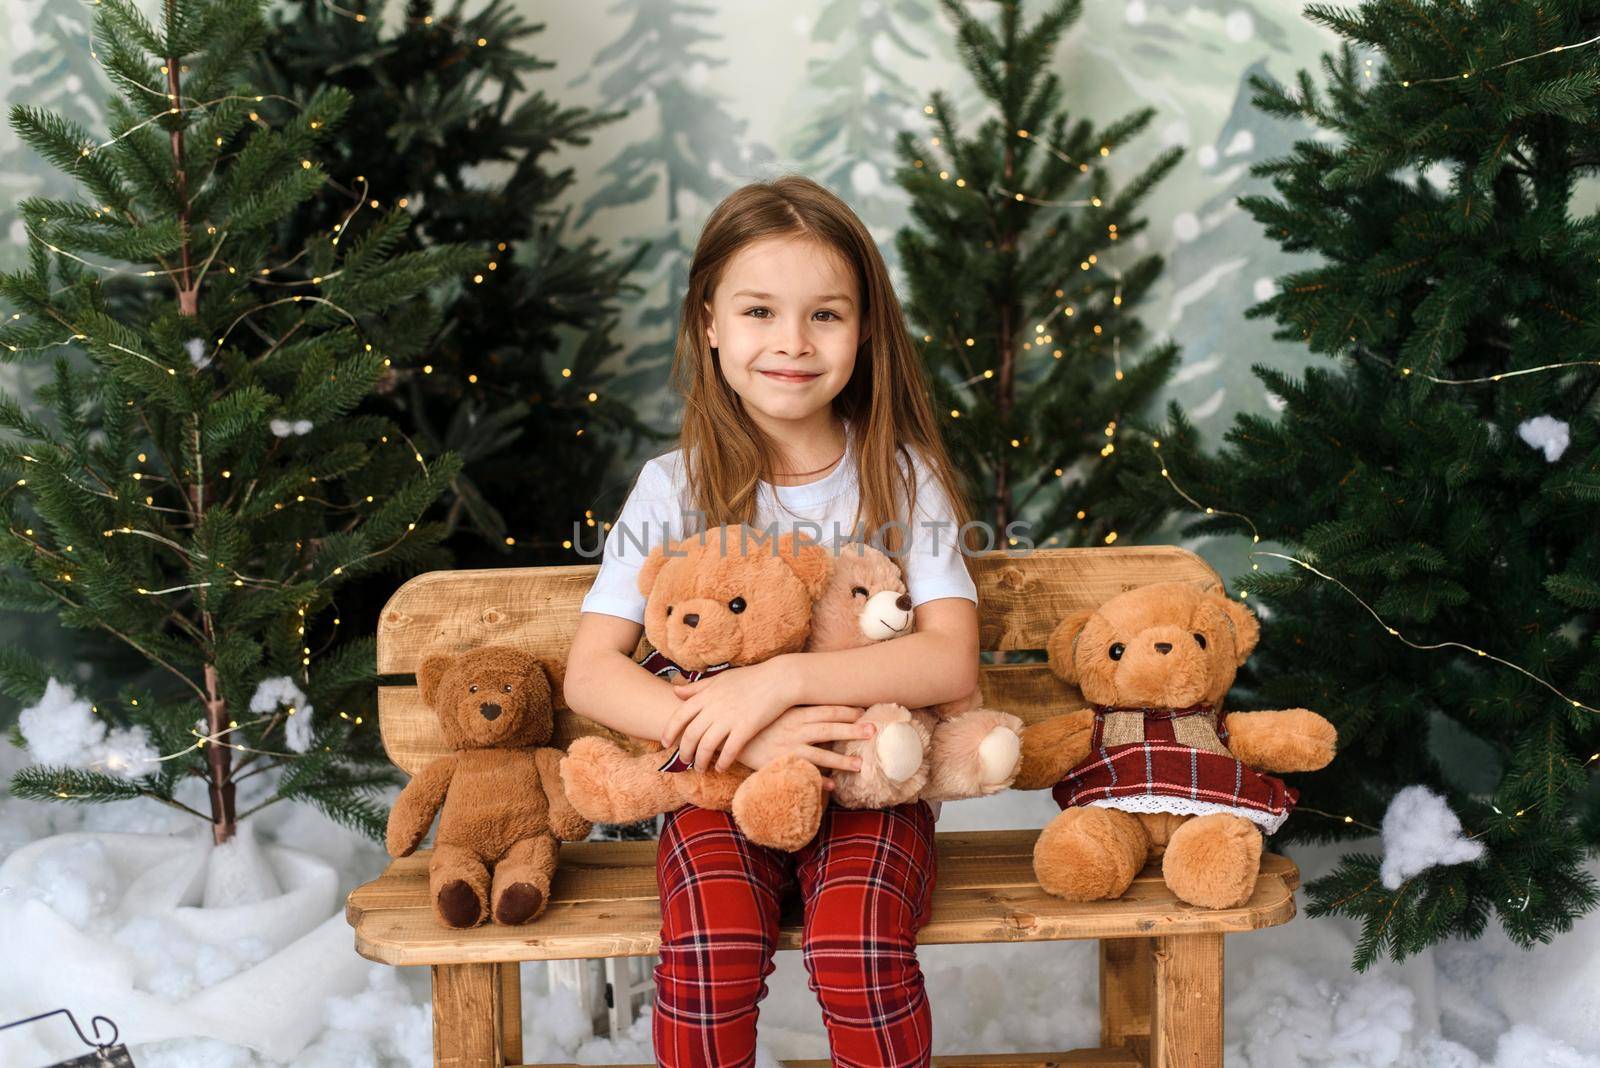 A cute little girl sits on a bench among the Christmas trees and rejoices at the gifts. Child girl with teddy bears in a Christmas interior.